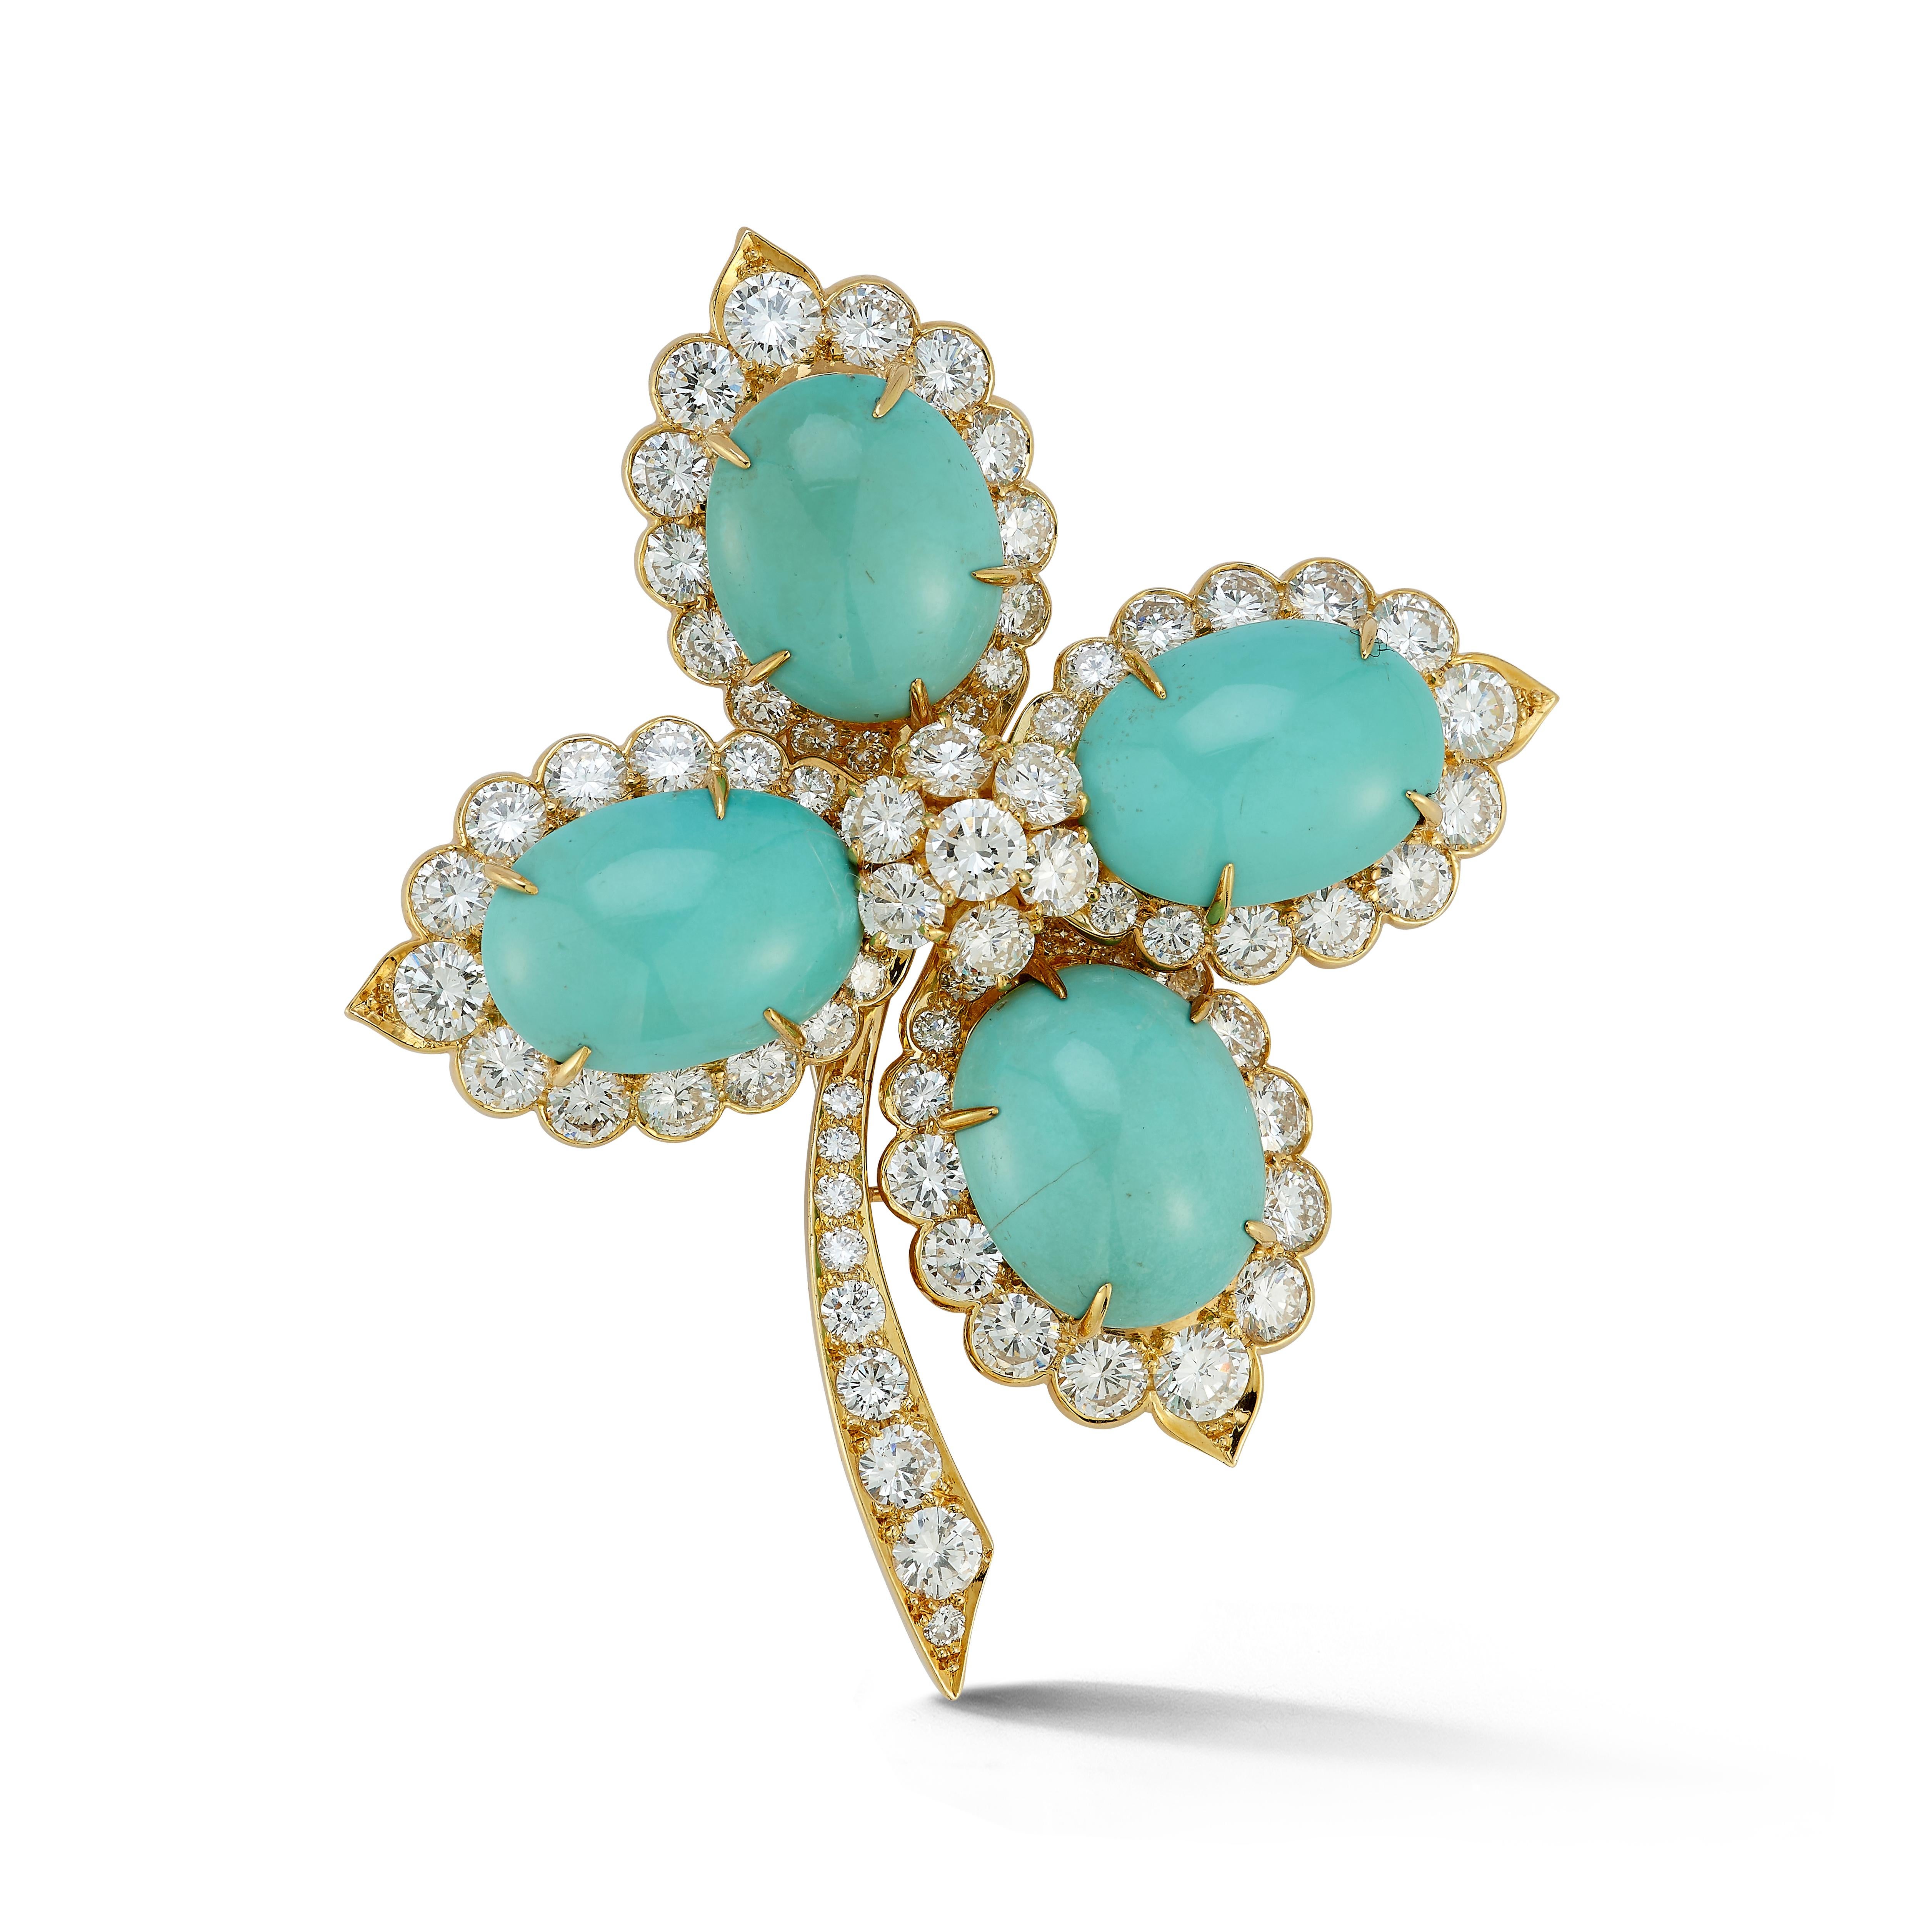 Van Cleef & Arpels Turquoise & Diamond Brooch

An 18 karat yellow gold flower motif brooch set with 76 round cut diamonds and 4 cabochon turquoise 

Signed Van Cleef & Arpels N.Y. and numbered

Measurements: 2.5